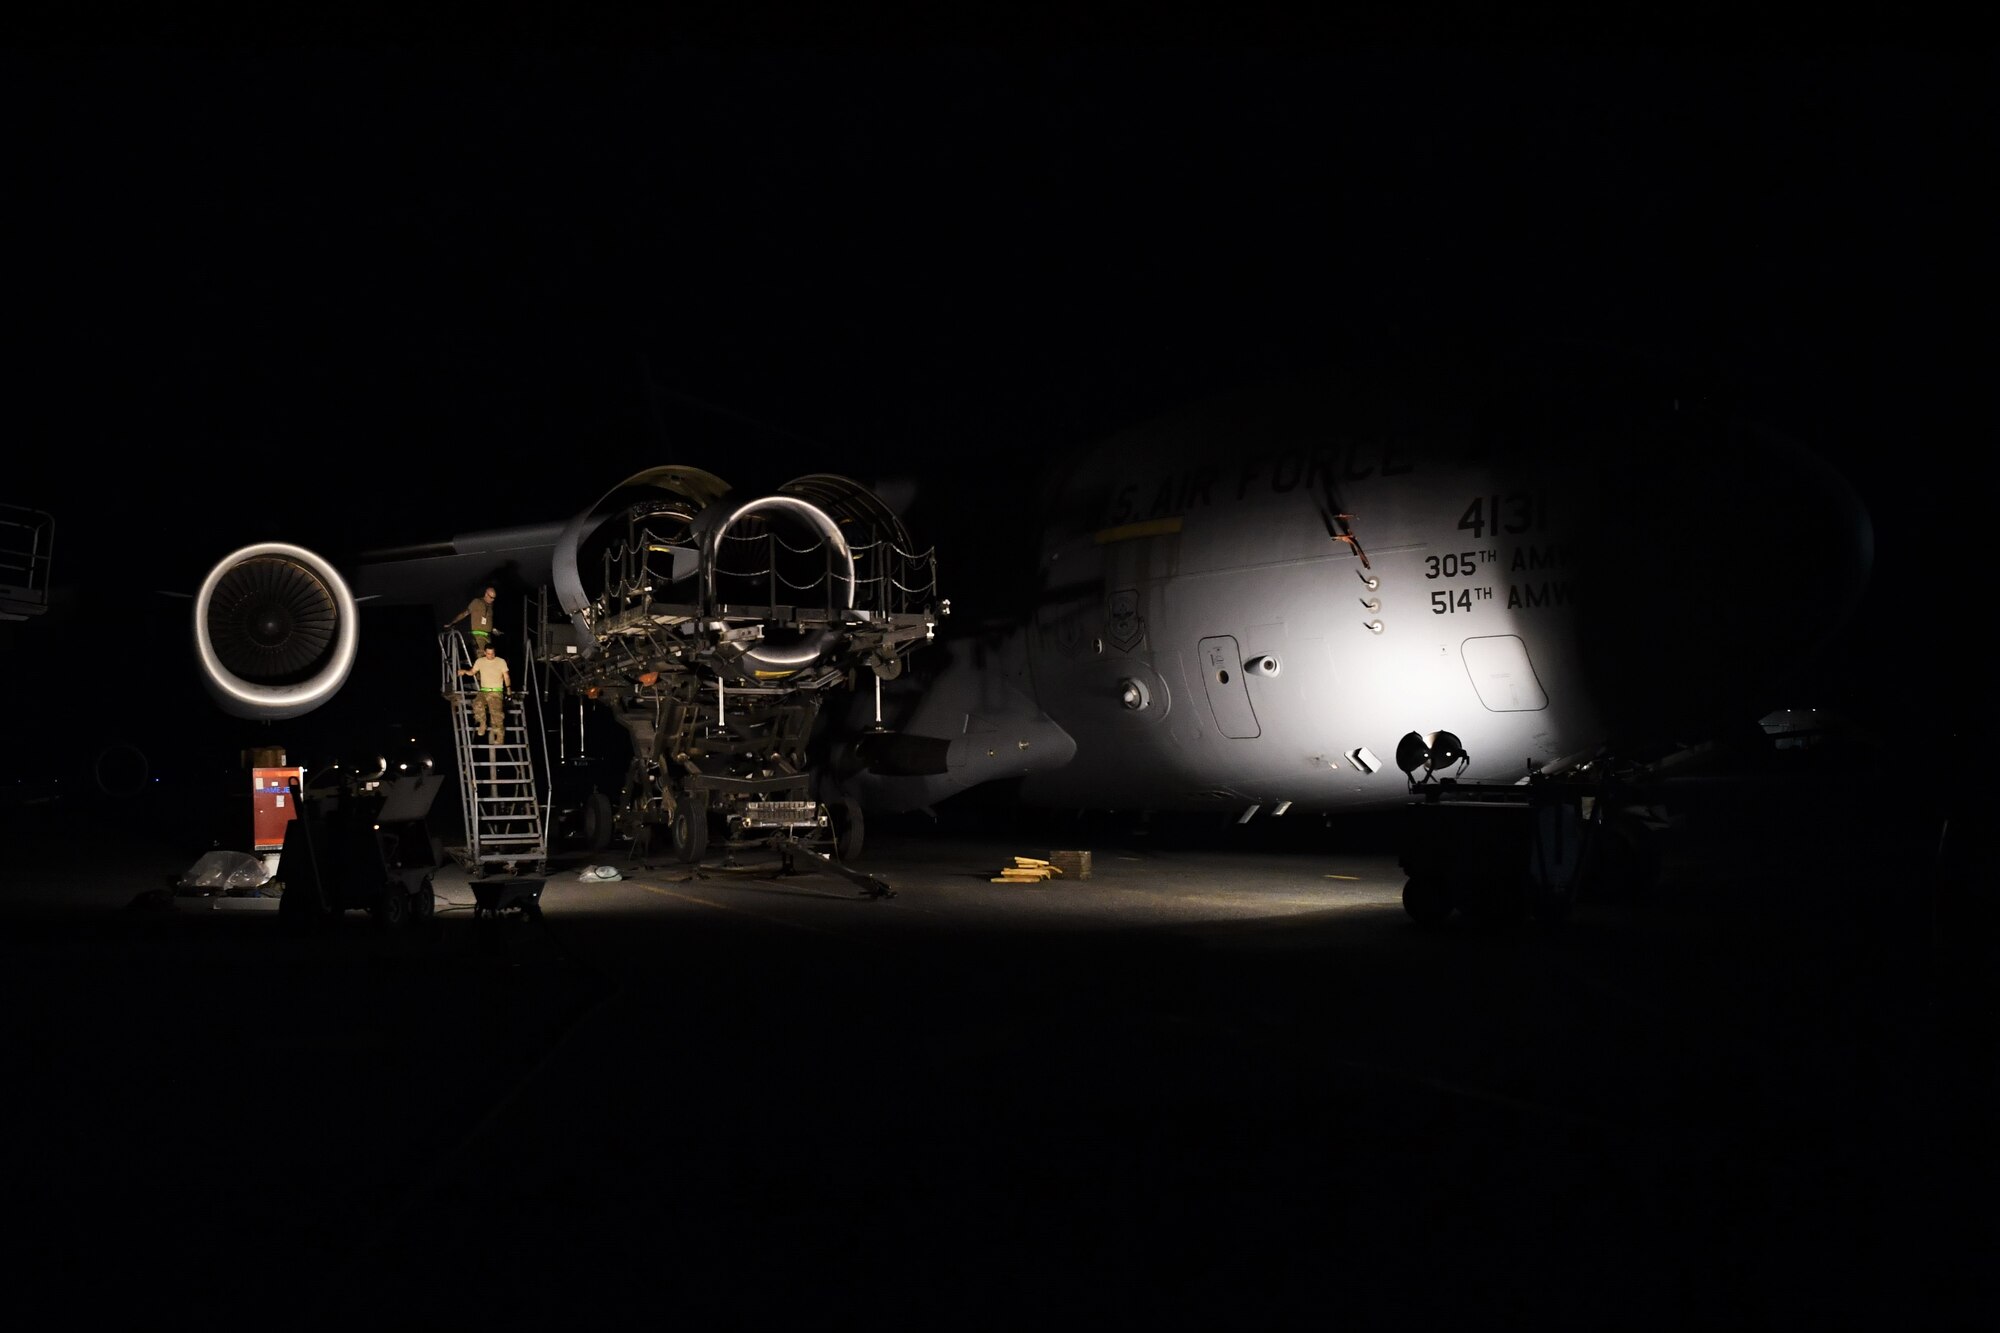 Members of the 5th Expeditionary Air Mobility Squadron descend a set of stairs during the installation of a C-17 Globemaster III aircraft July 19, 2018, at an undisclosed location in Southwest Asia. The 5th EAMS teamed up with the 721st Air Mobility Operations Group from Ramstein Air Base, Germany, to replace one of the four engines. (U.S. Air Force photo by Staff Sgt. Christopher Stoltz)